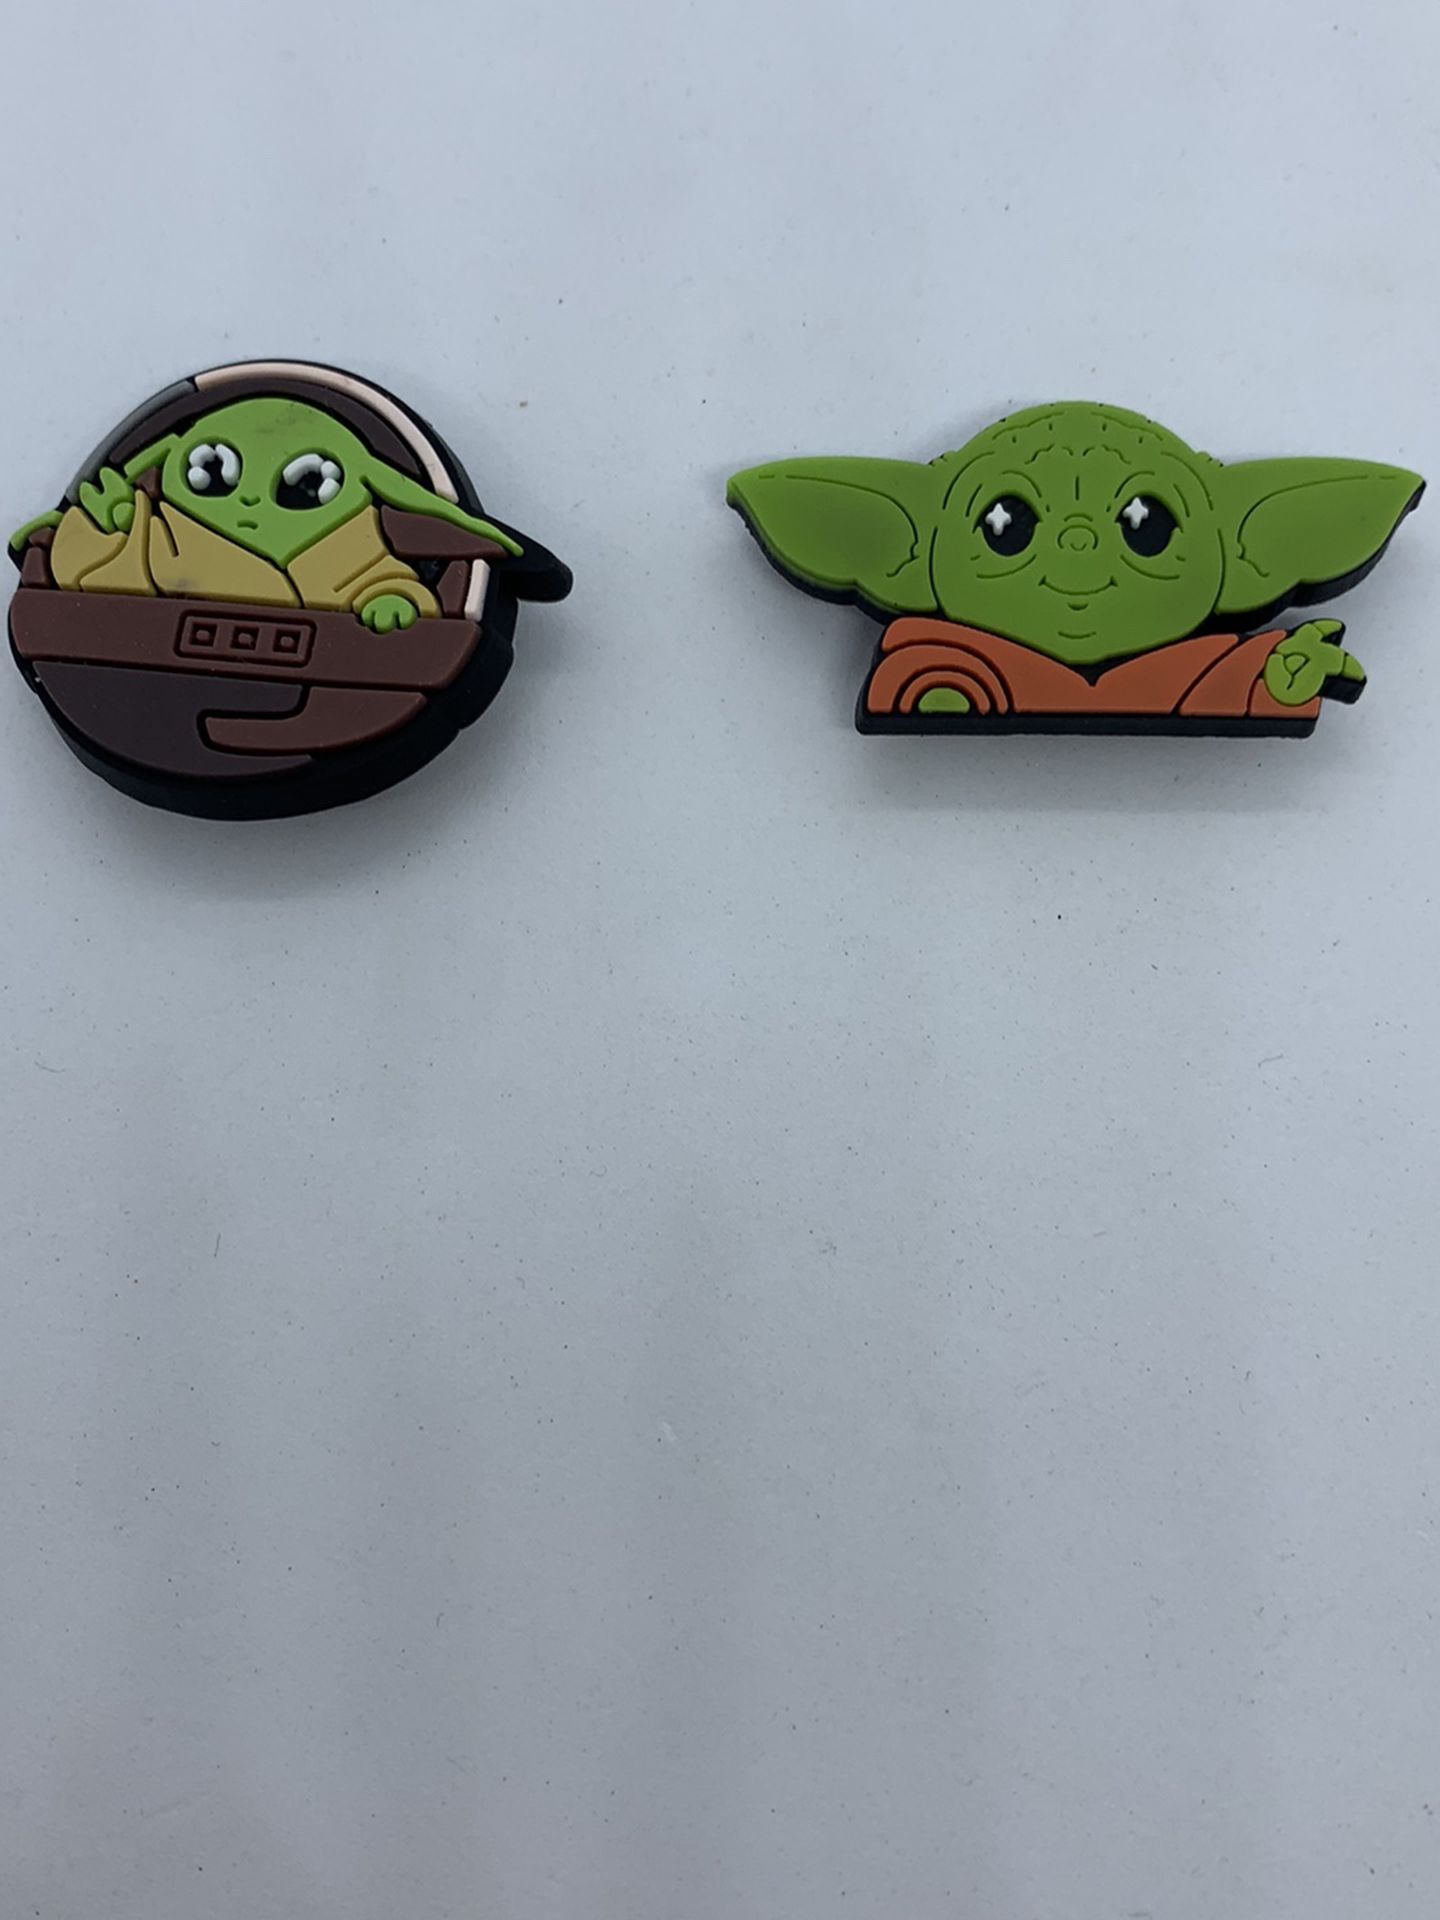 Baby Yoda Charms For Crocs Shoes 2 Pcs 5$